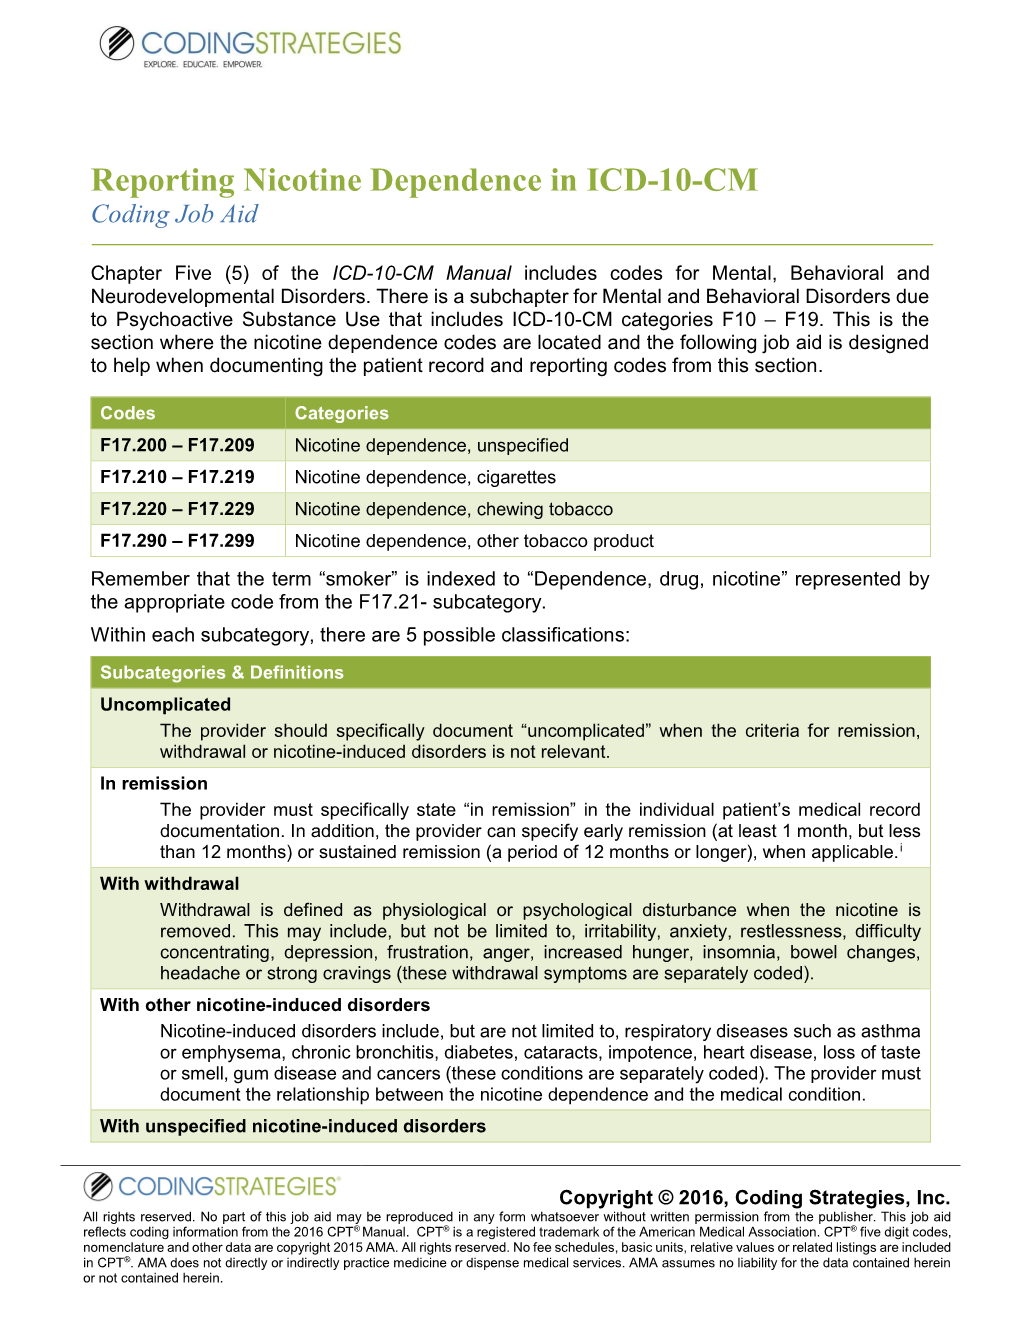 Reporting Nicotine Dependence in ICD-10-CM Coding Job Aid